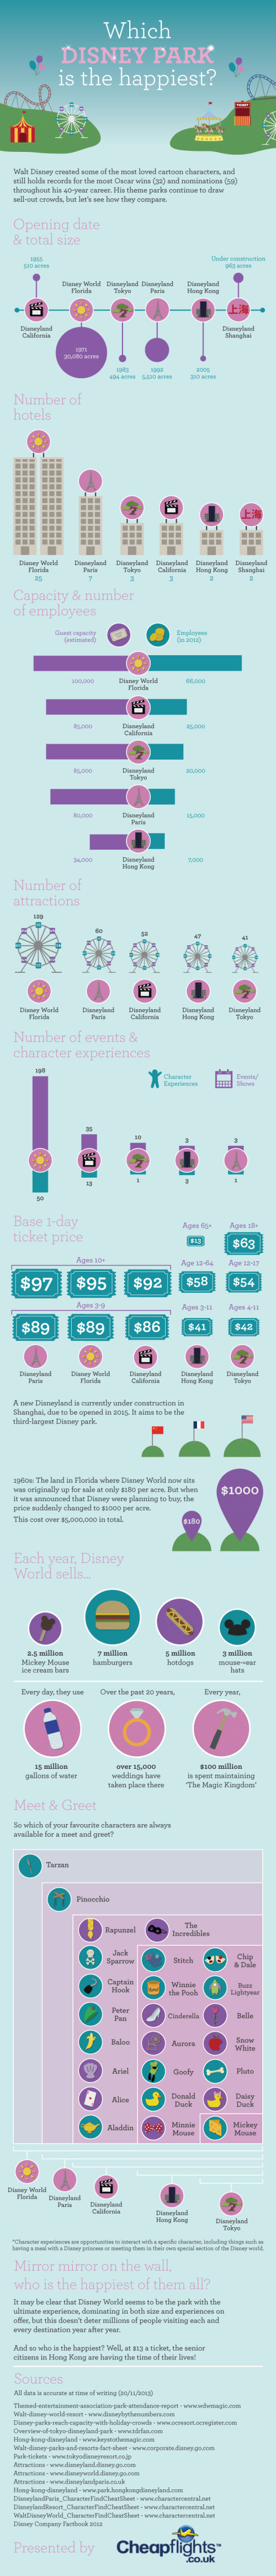 Which Disney Park is the Happiest? infographic